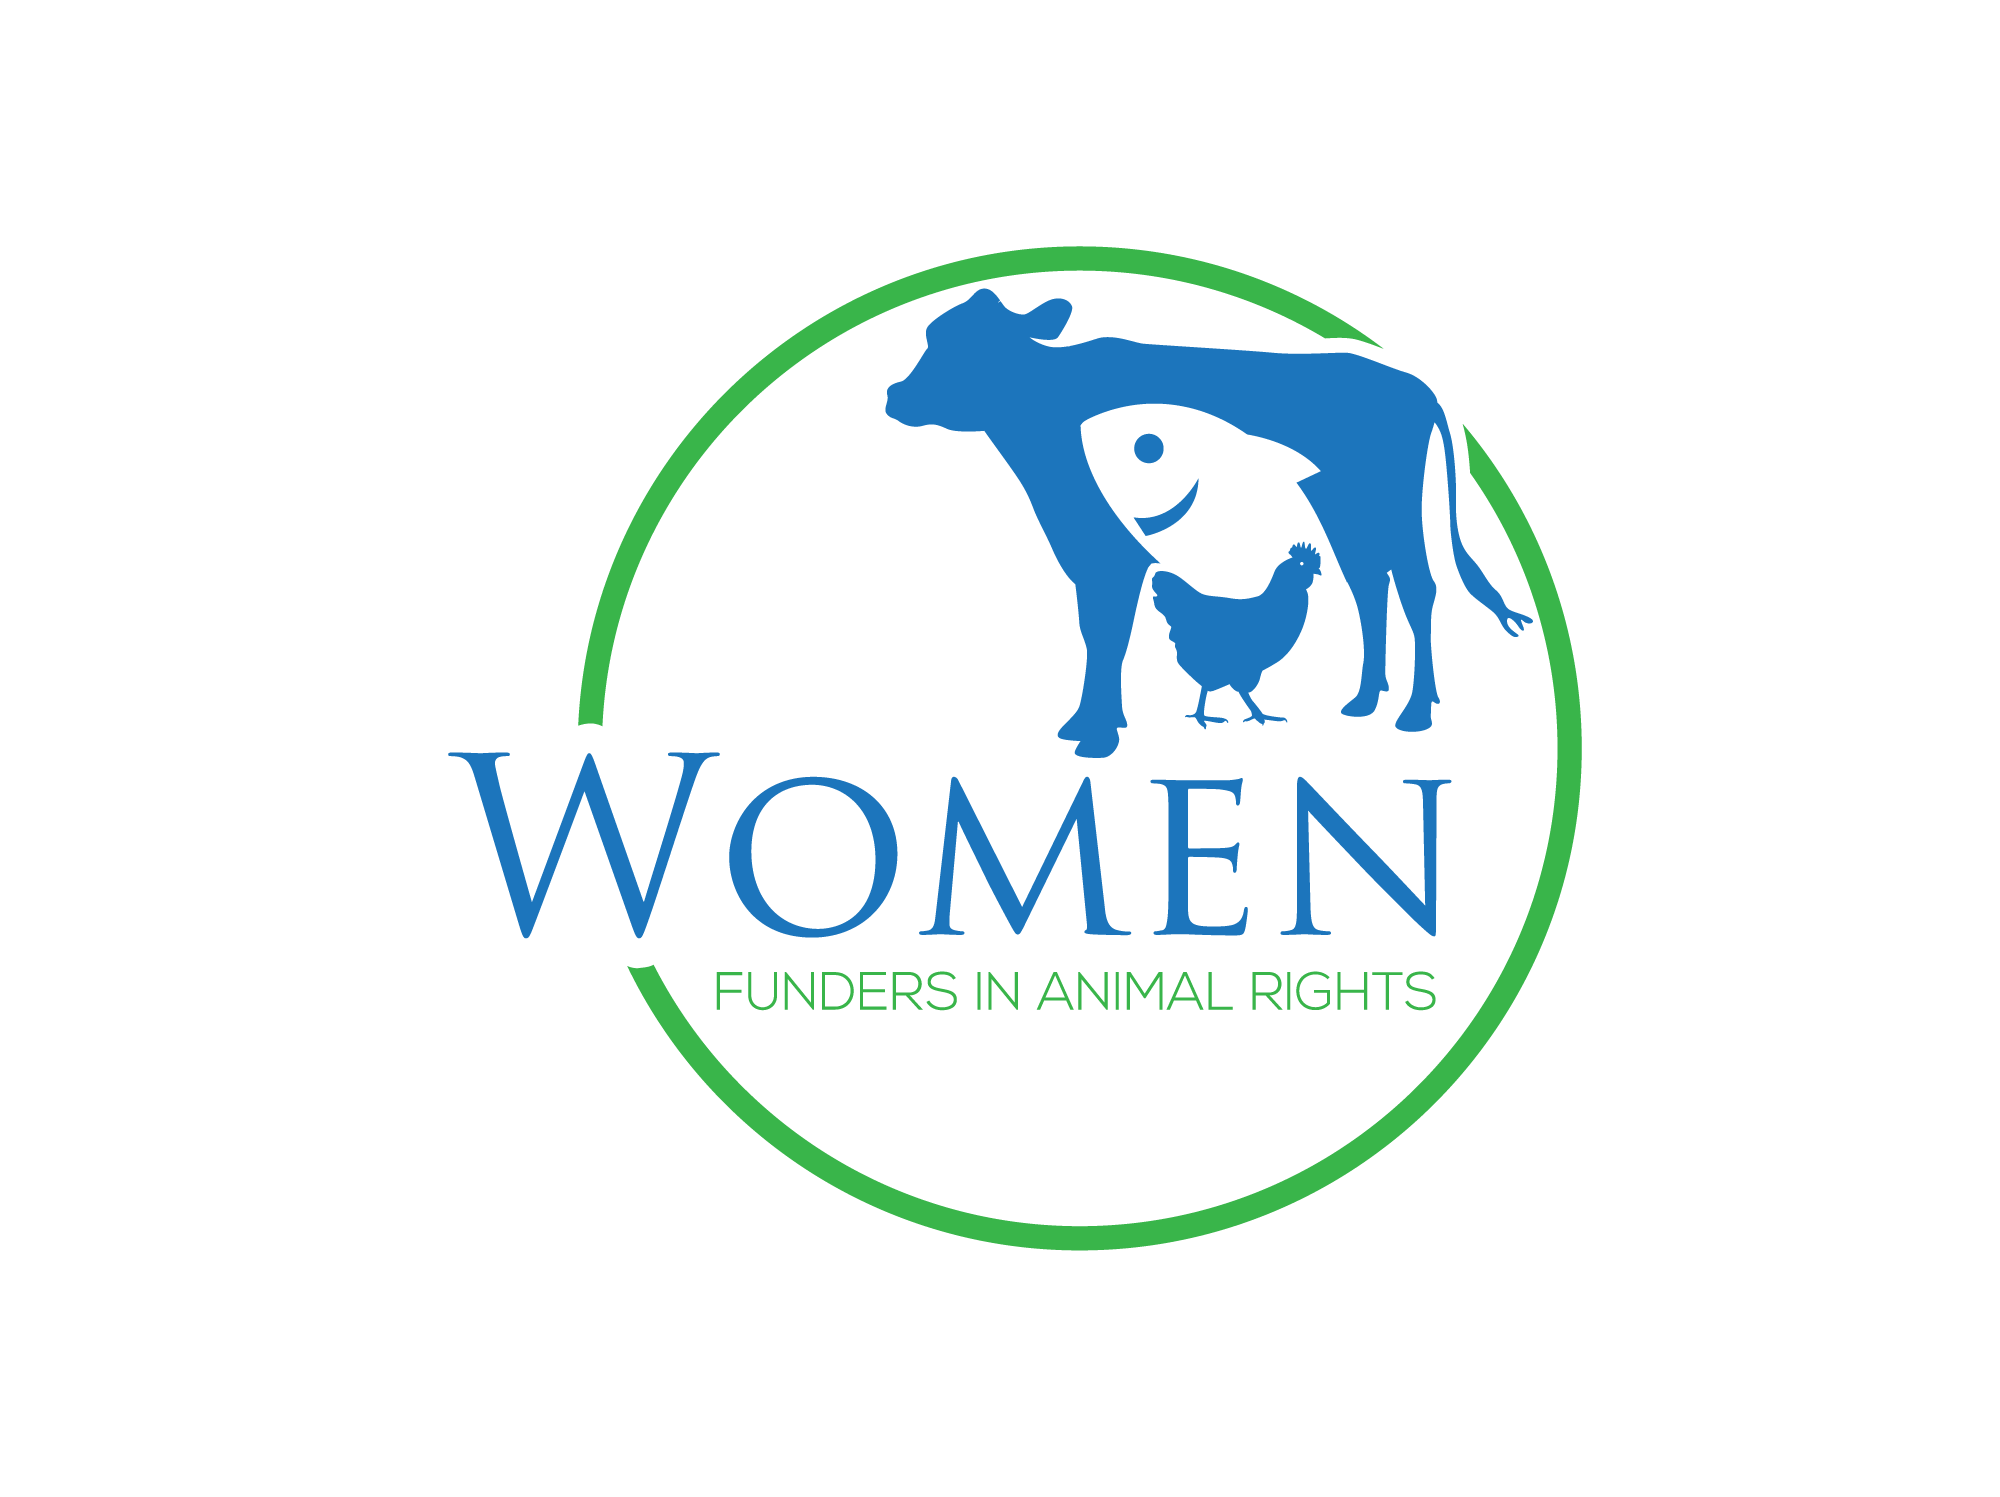 Women Funders in Animal Rights